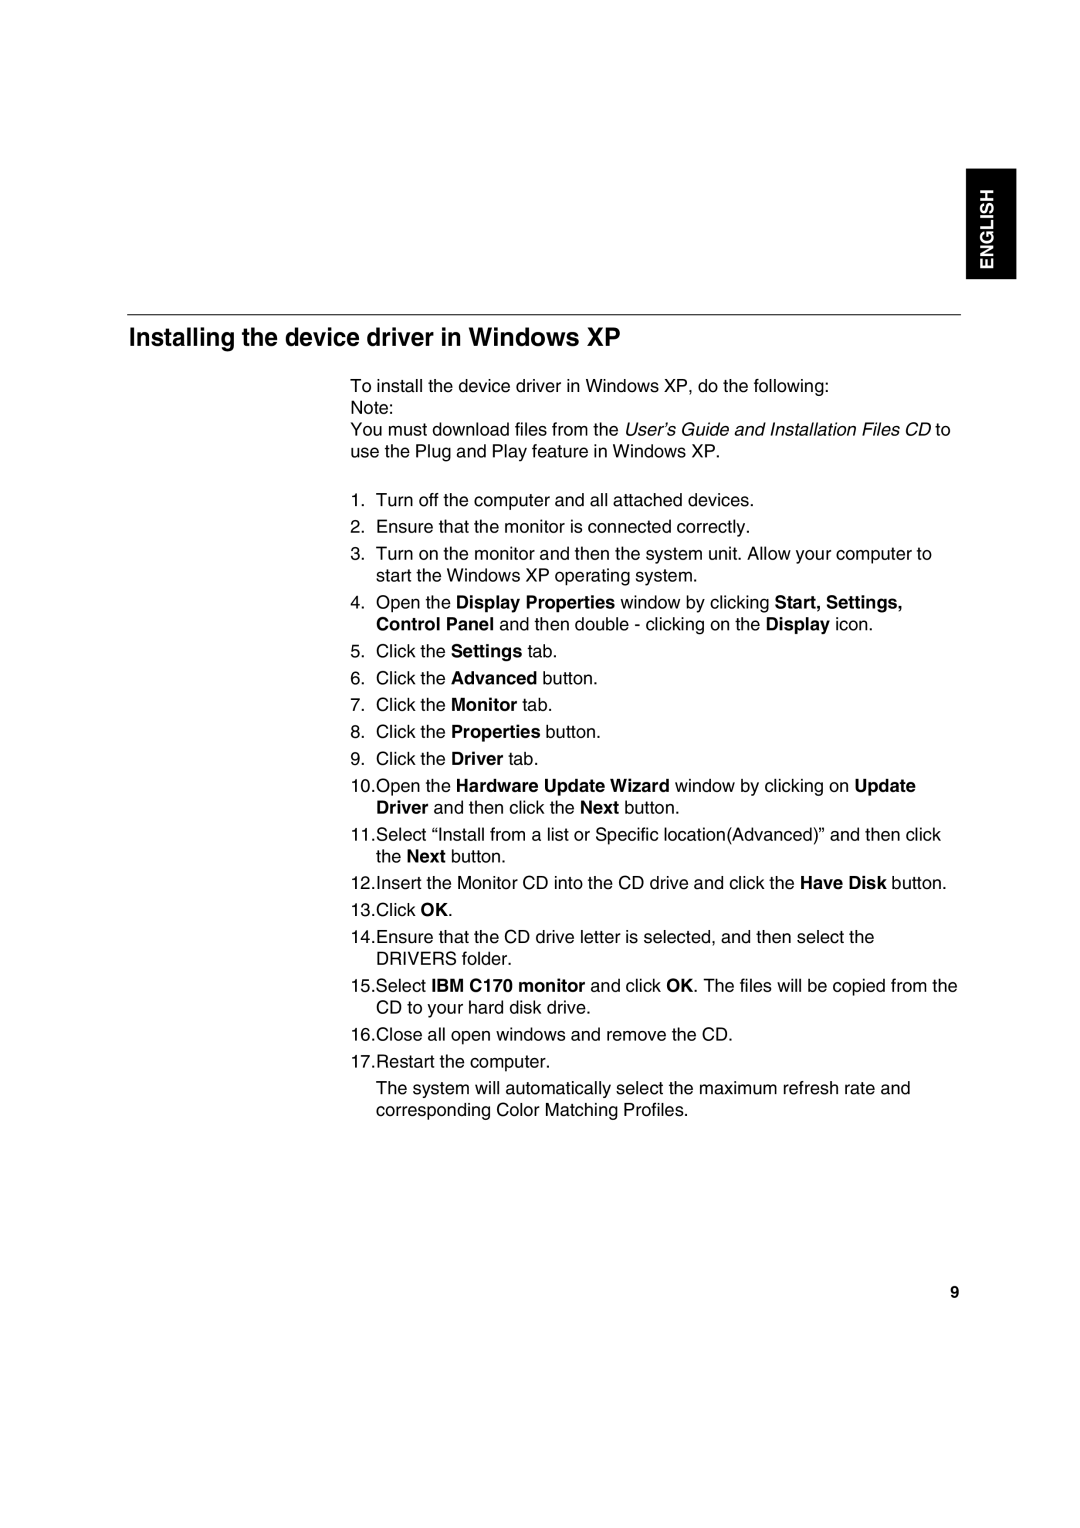 IBM C170 manual Installing the device driver in Windows XP, English 